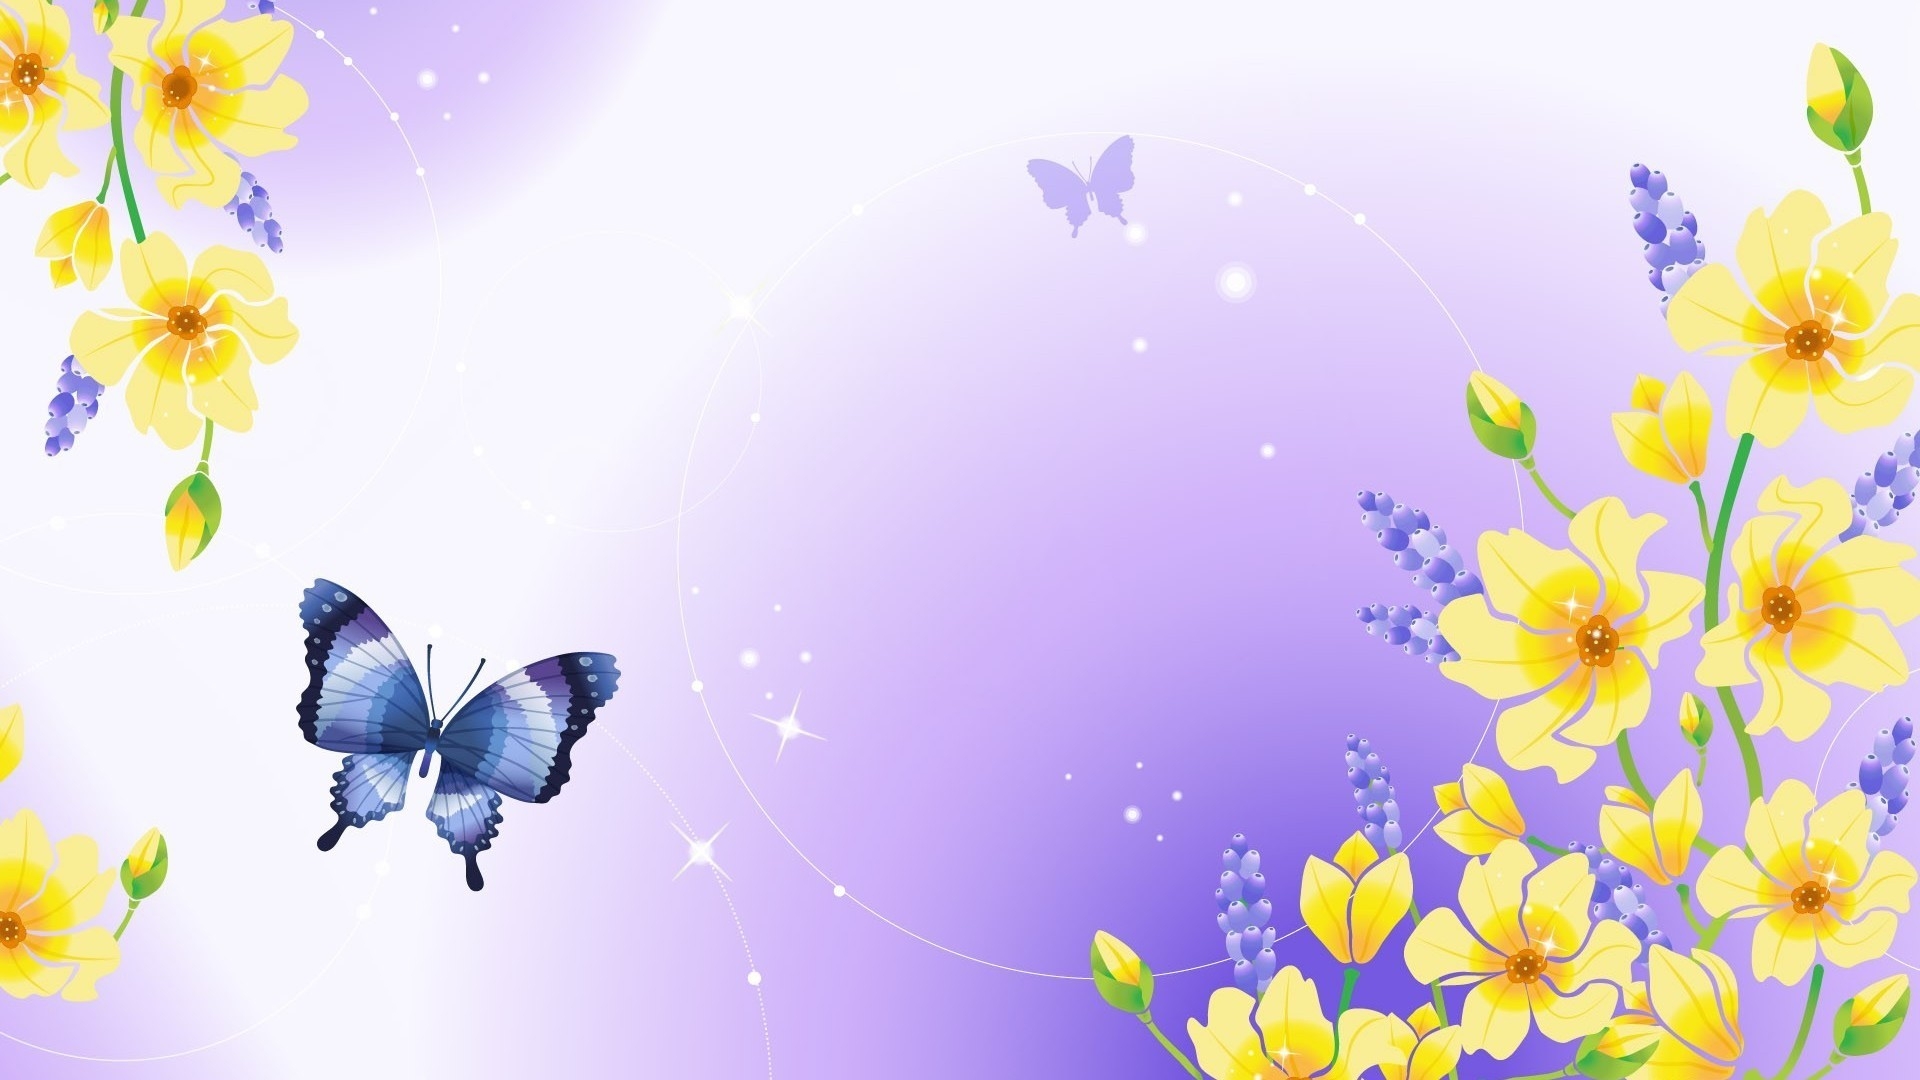 Butterfly and Flowers for 1920 x 1080 HDTV 1080p resolution